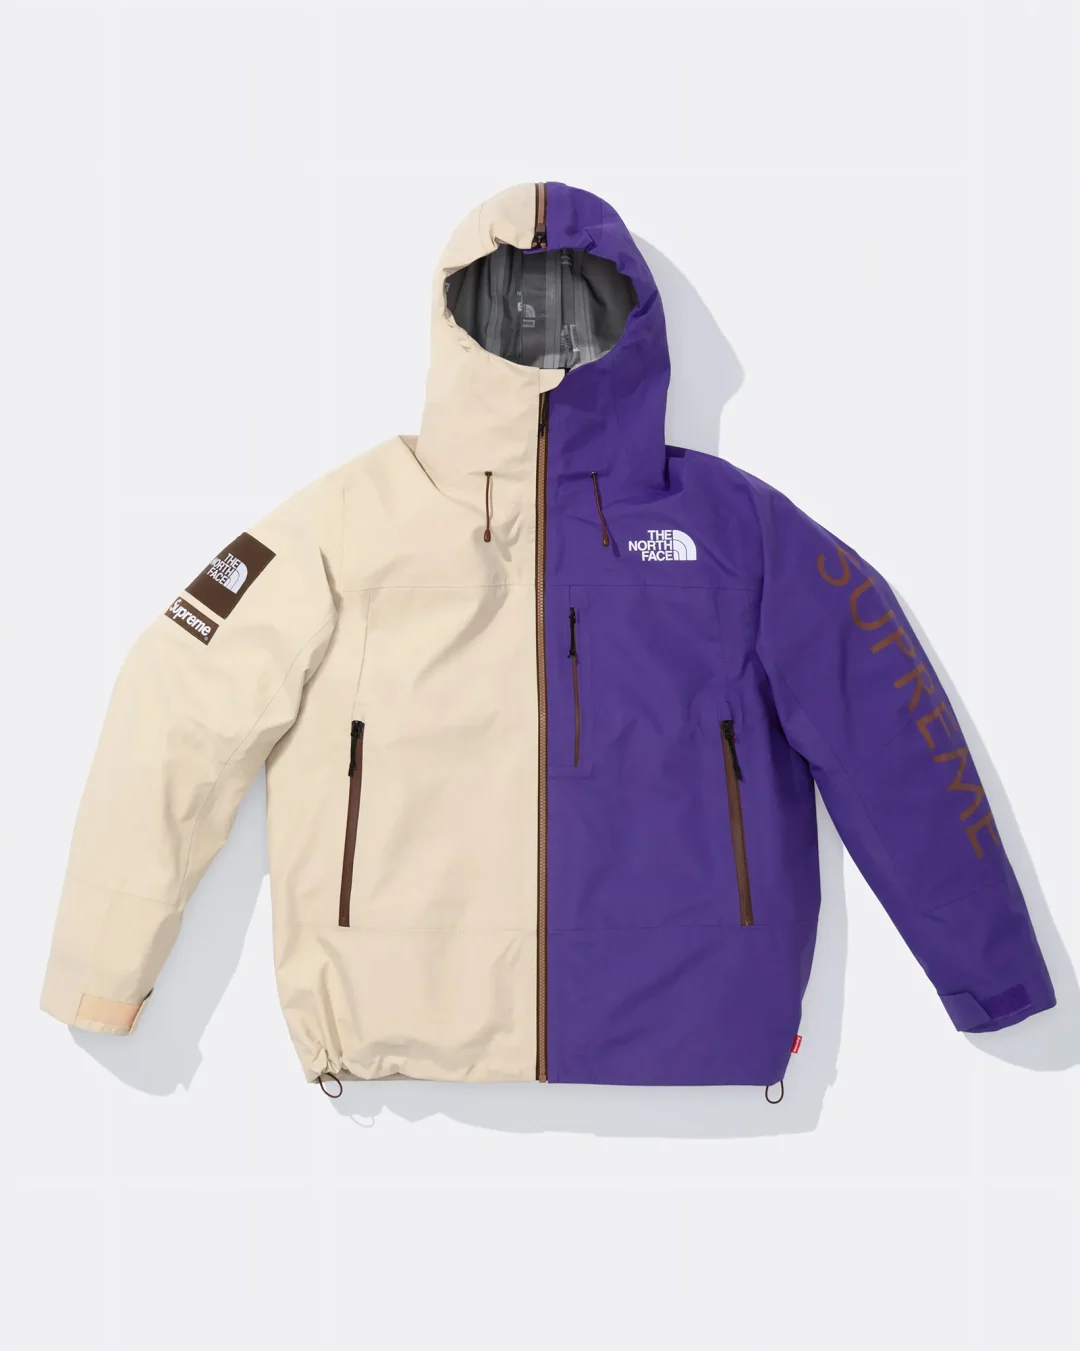 Supreme × THE NORTH FACE 24SS コラボアイテムが3/2 Week3に国内発売 